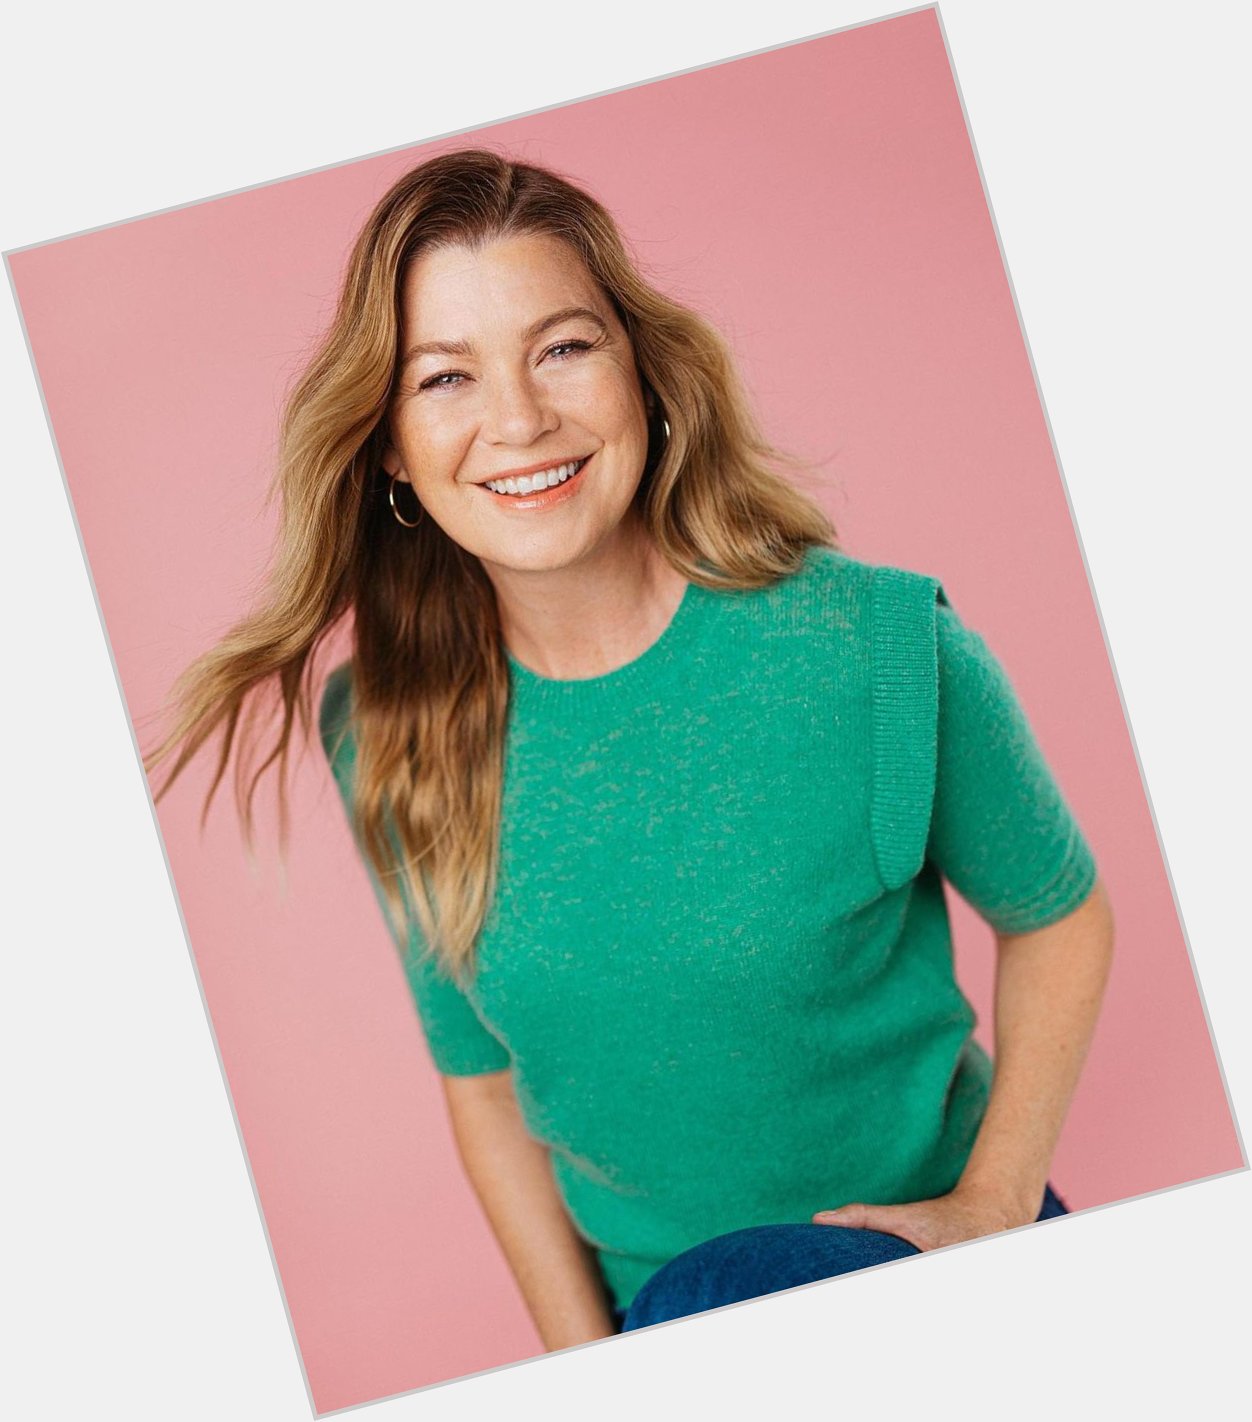 Happy birthday Ellen Pompeo your my queen angle love you so much and I hope you happy every time      